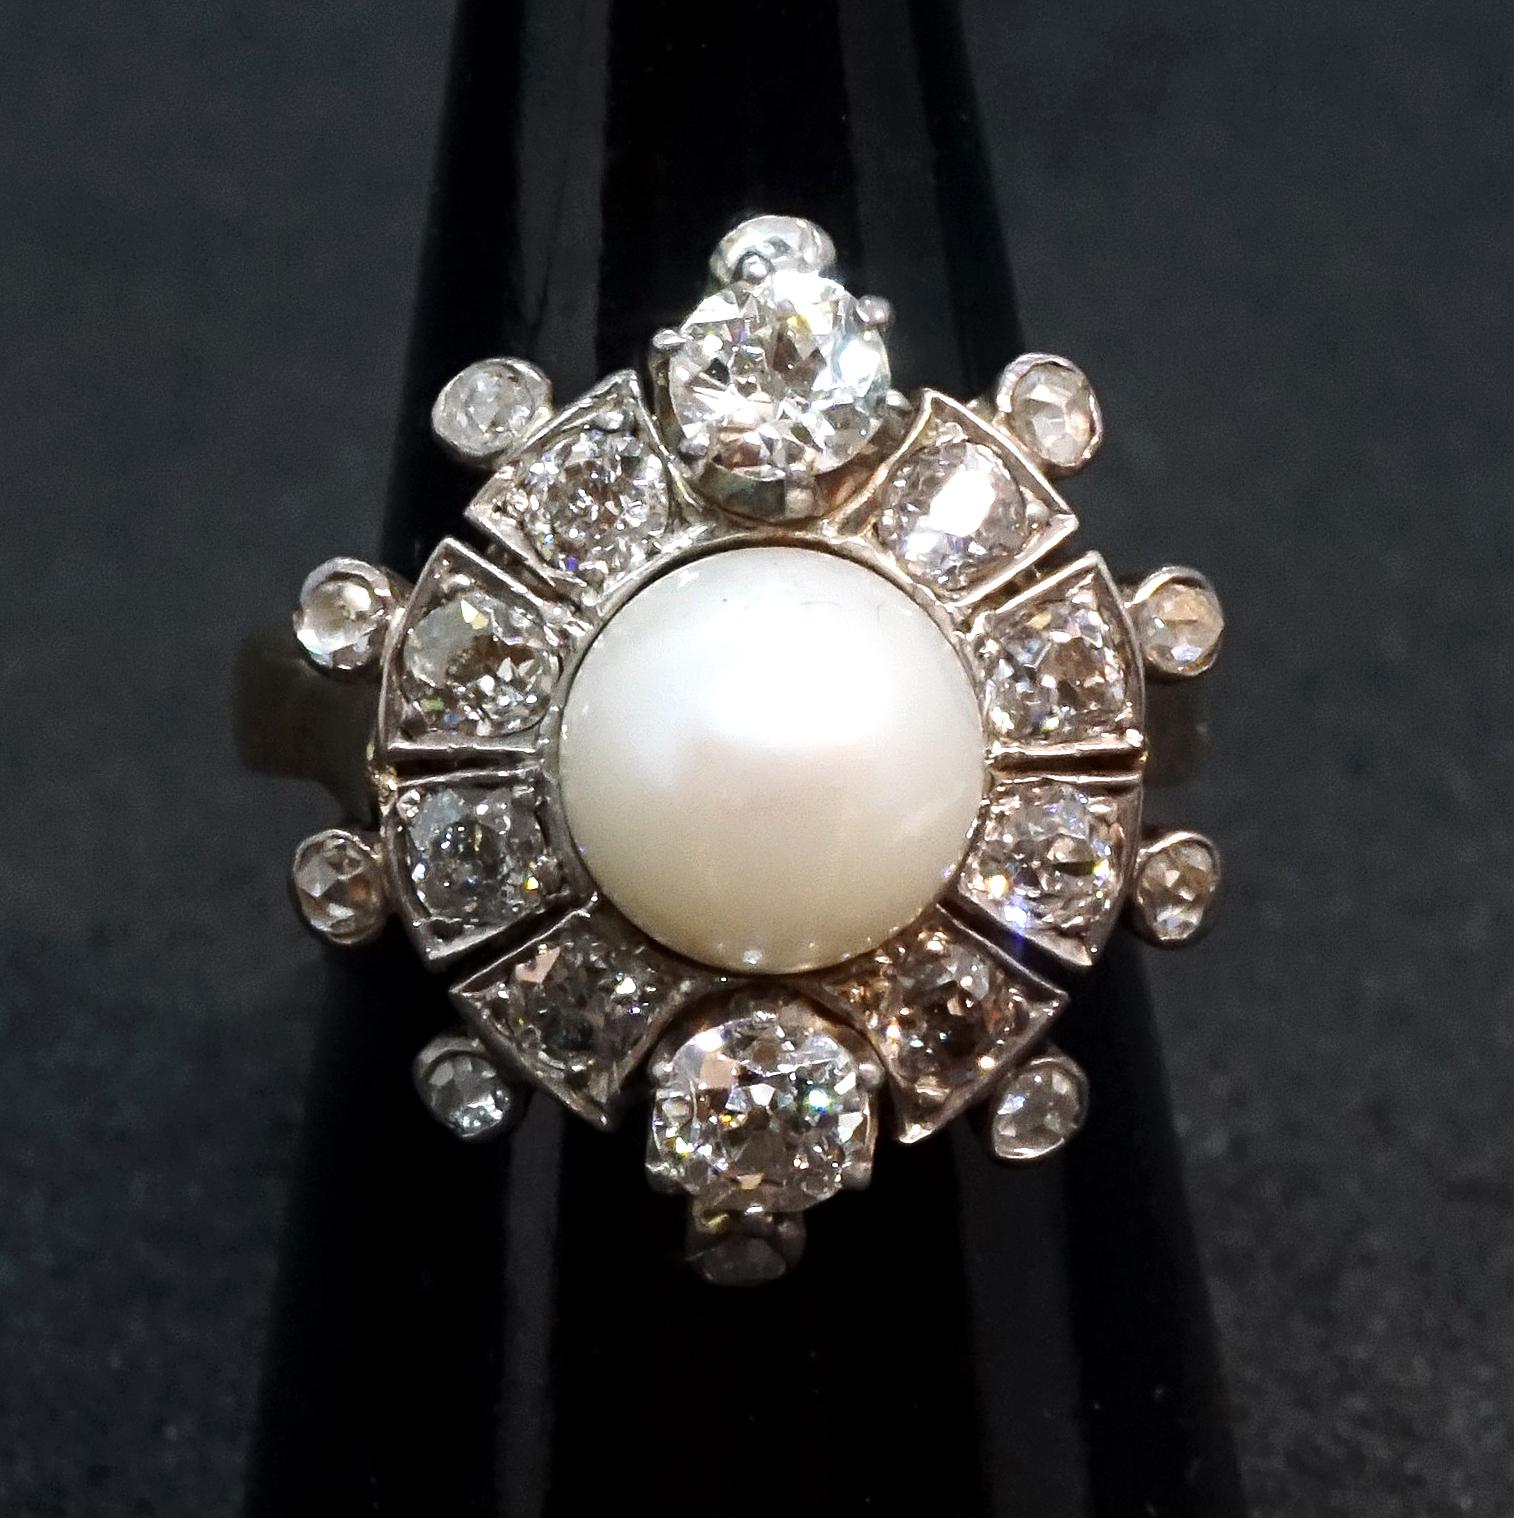 Antique flower-shaped old brilliant-cut diamond ring with a centered pearl:
two old brilliant-cut diamonds on top in a line with a 0.7 cm pearl, estimated to weigh 0.25 ct each (0.5 in total), between them, further eight diamonds surounding the